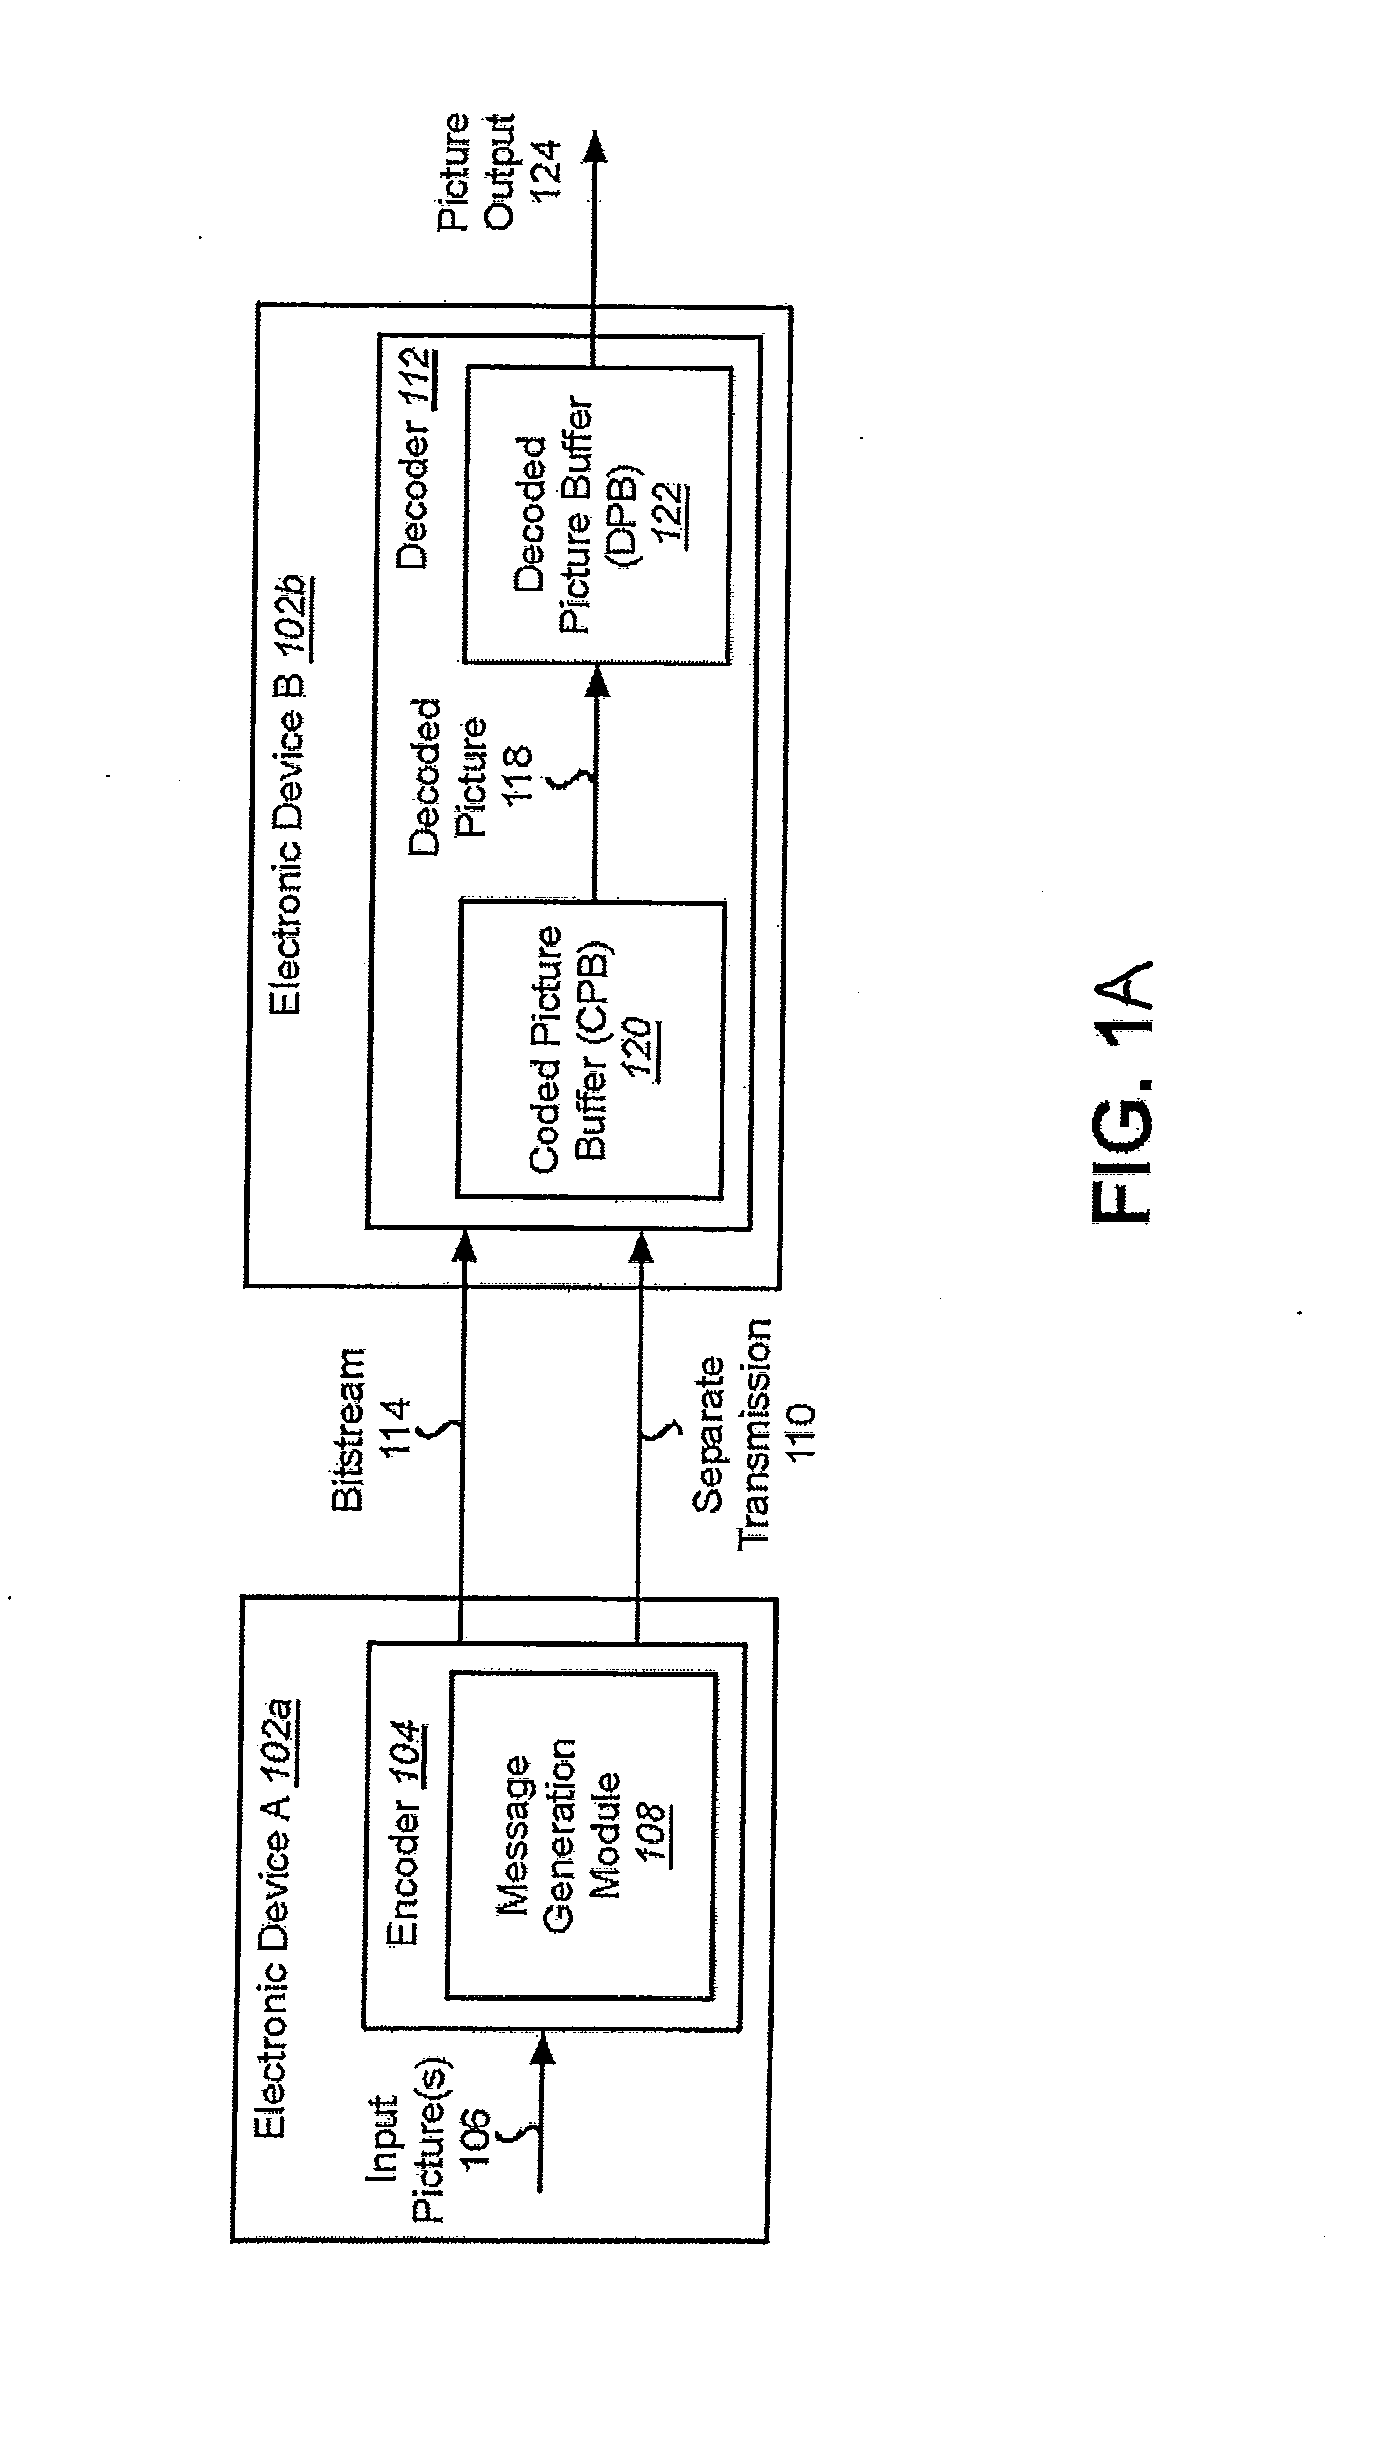 Signaling change in output layer sets